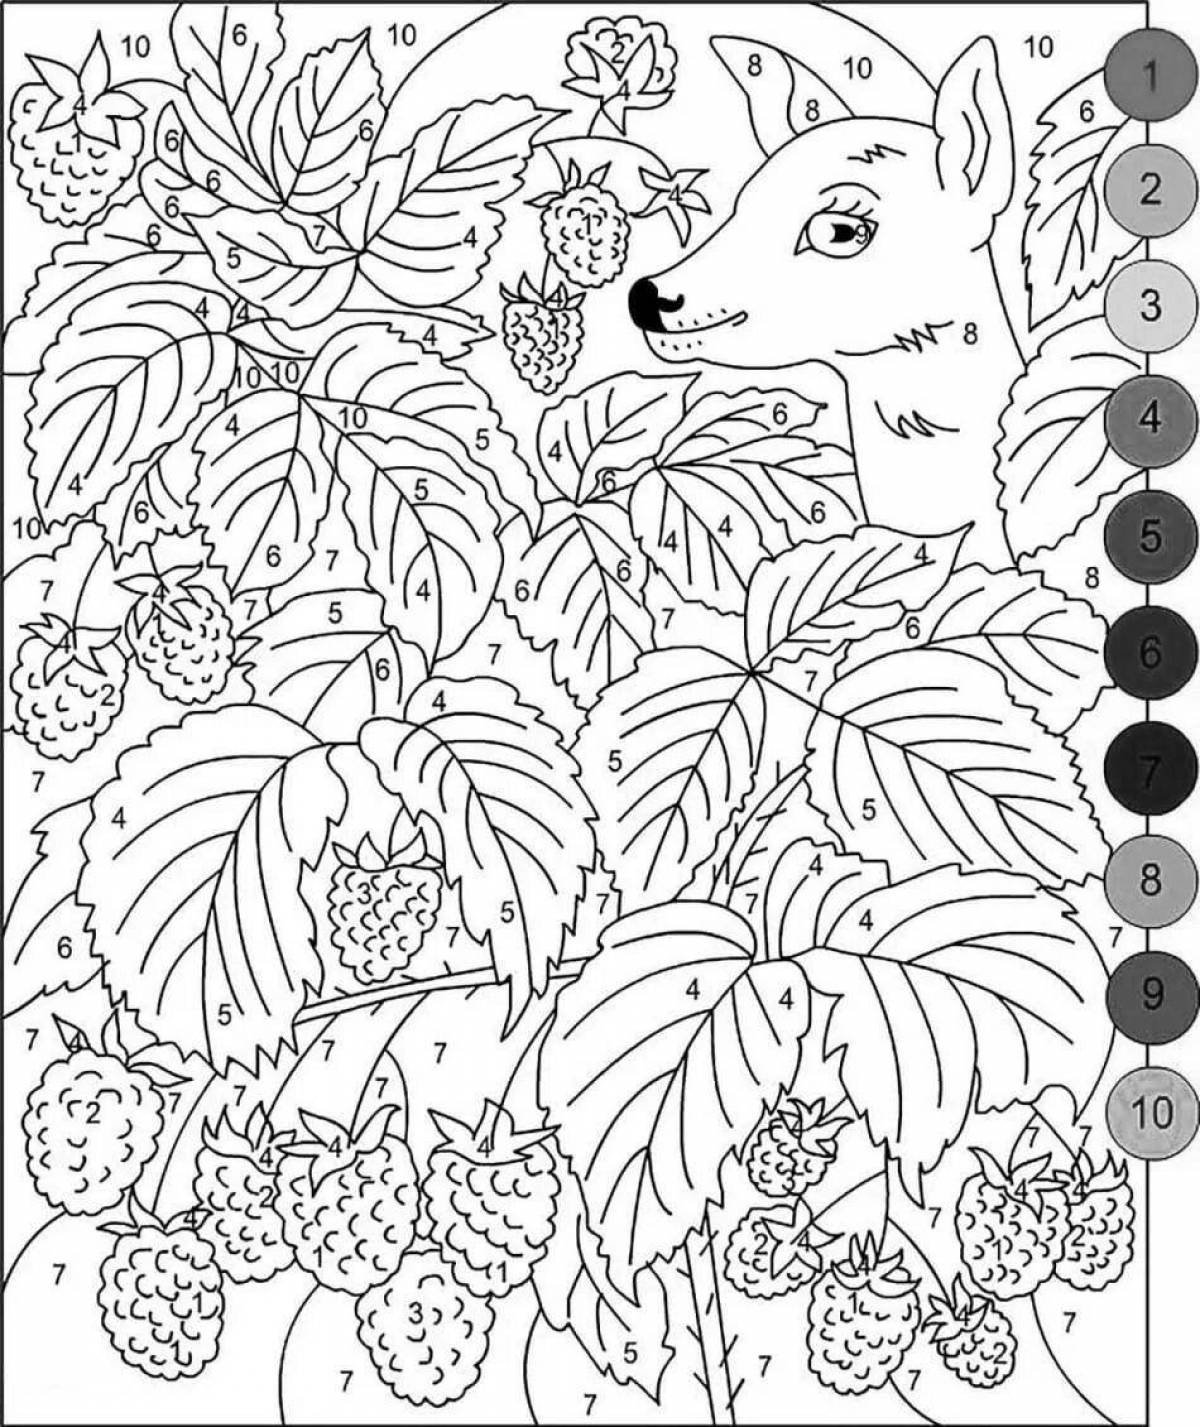 Attractive coloring book for girls 11-12 years old difficult by numbers